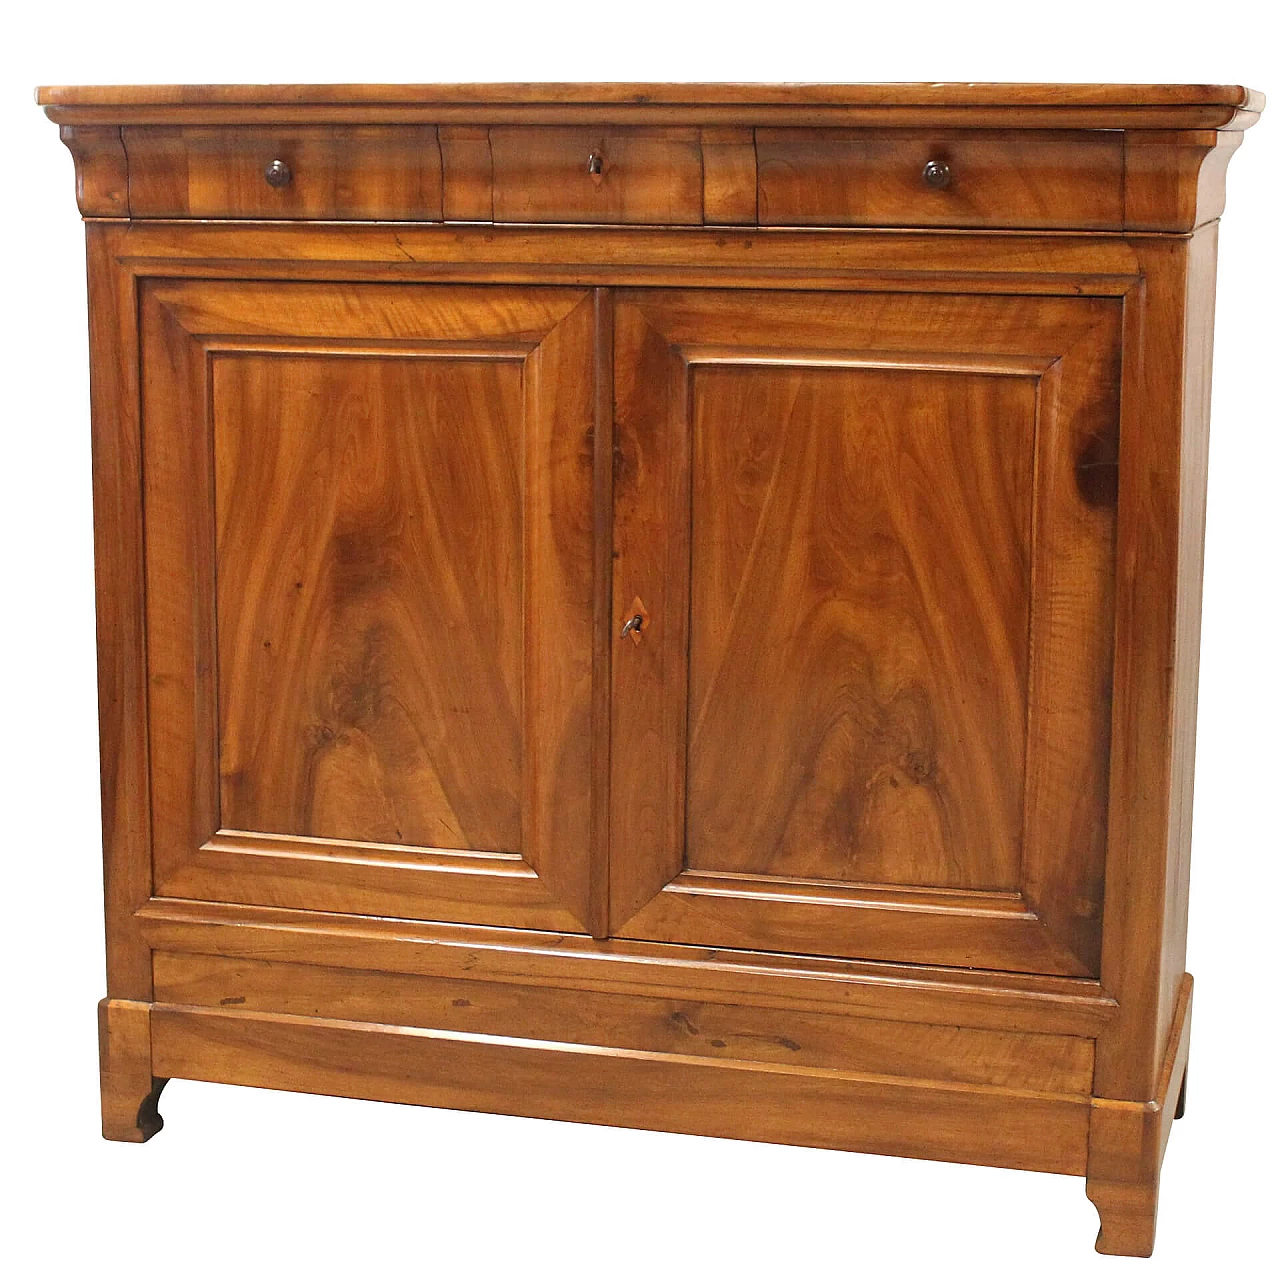 Louis-Philippe Capuchin sideboard in solid walnut, 19th century 1259300